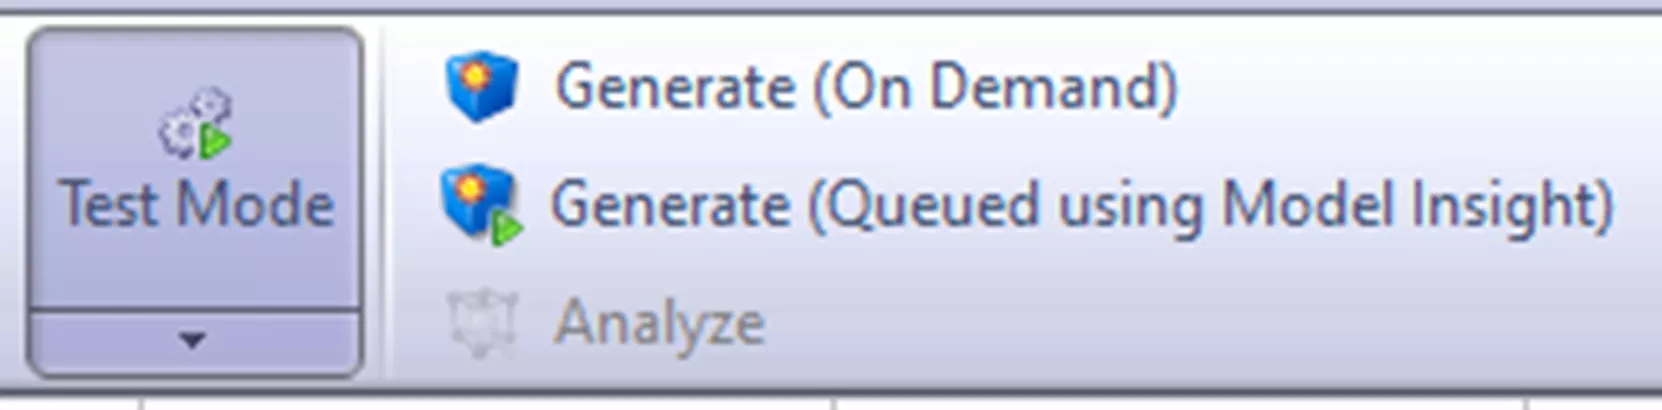 DriveWorks Test Mode Generate (On Demand) vs Generate Queued Using Model Insight 